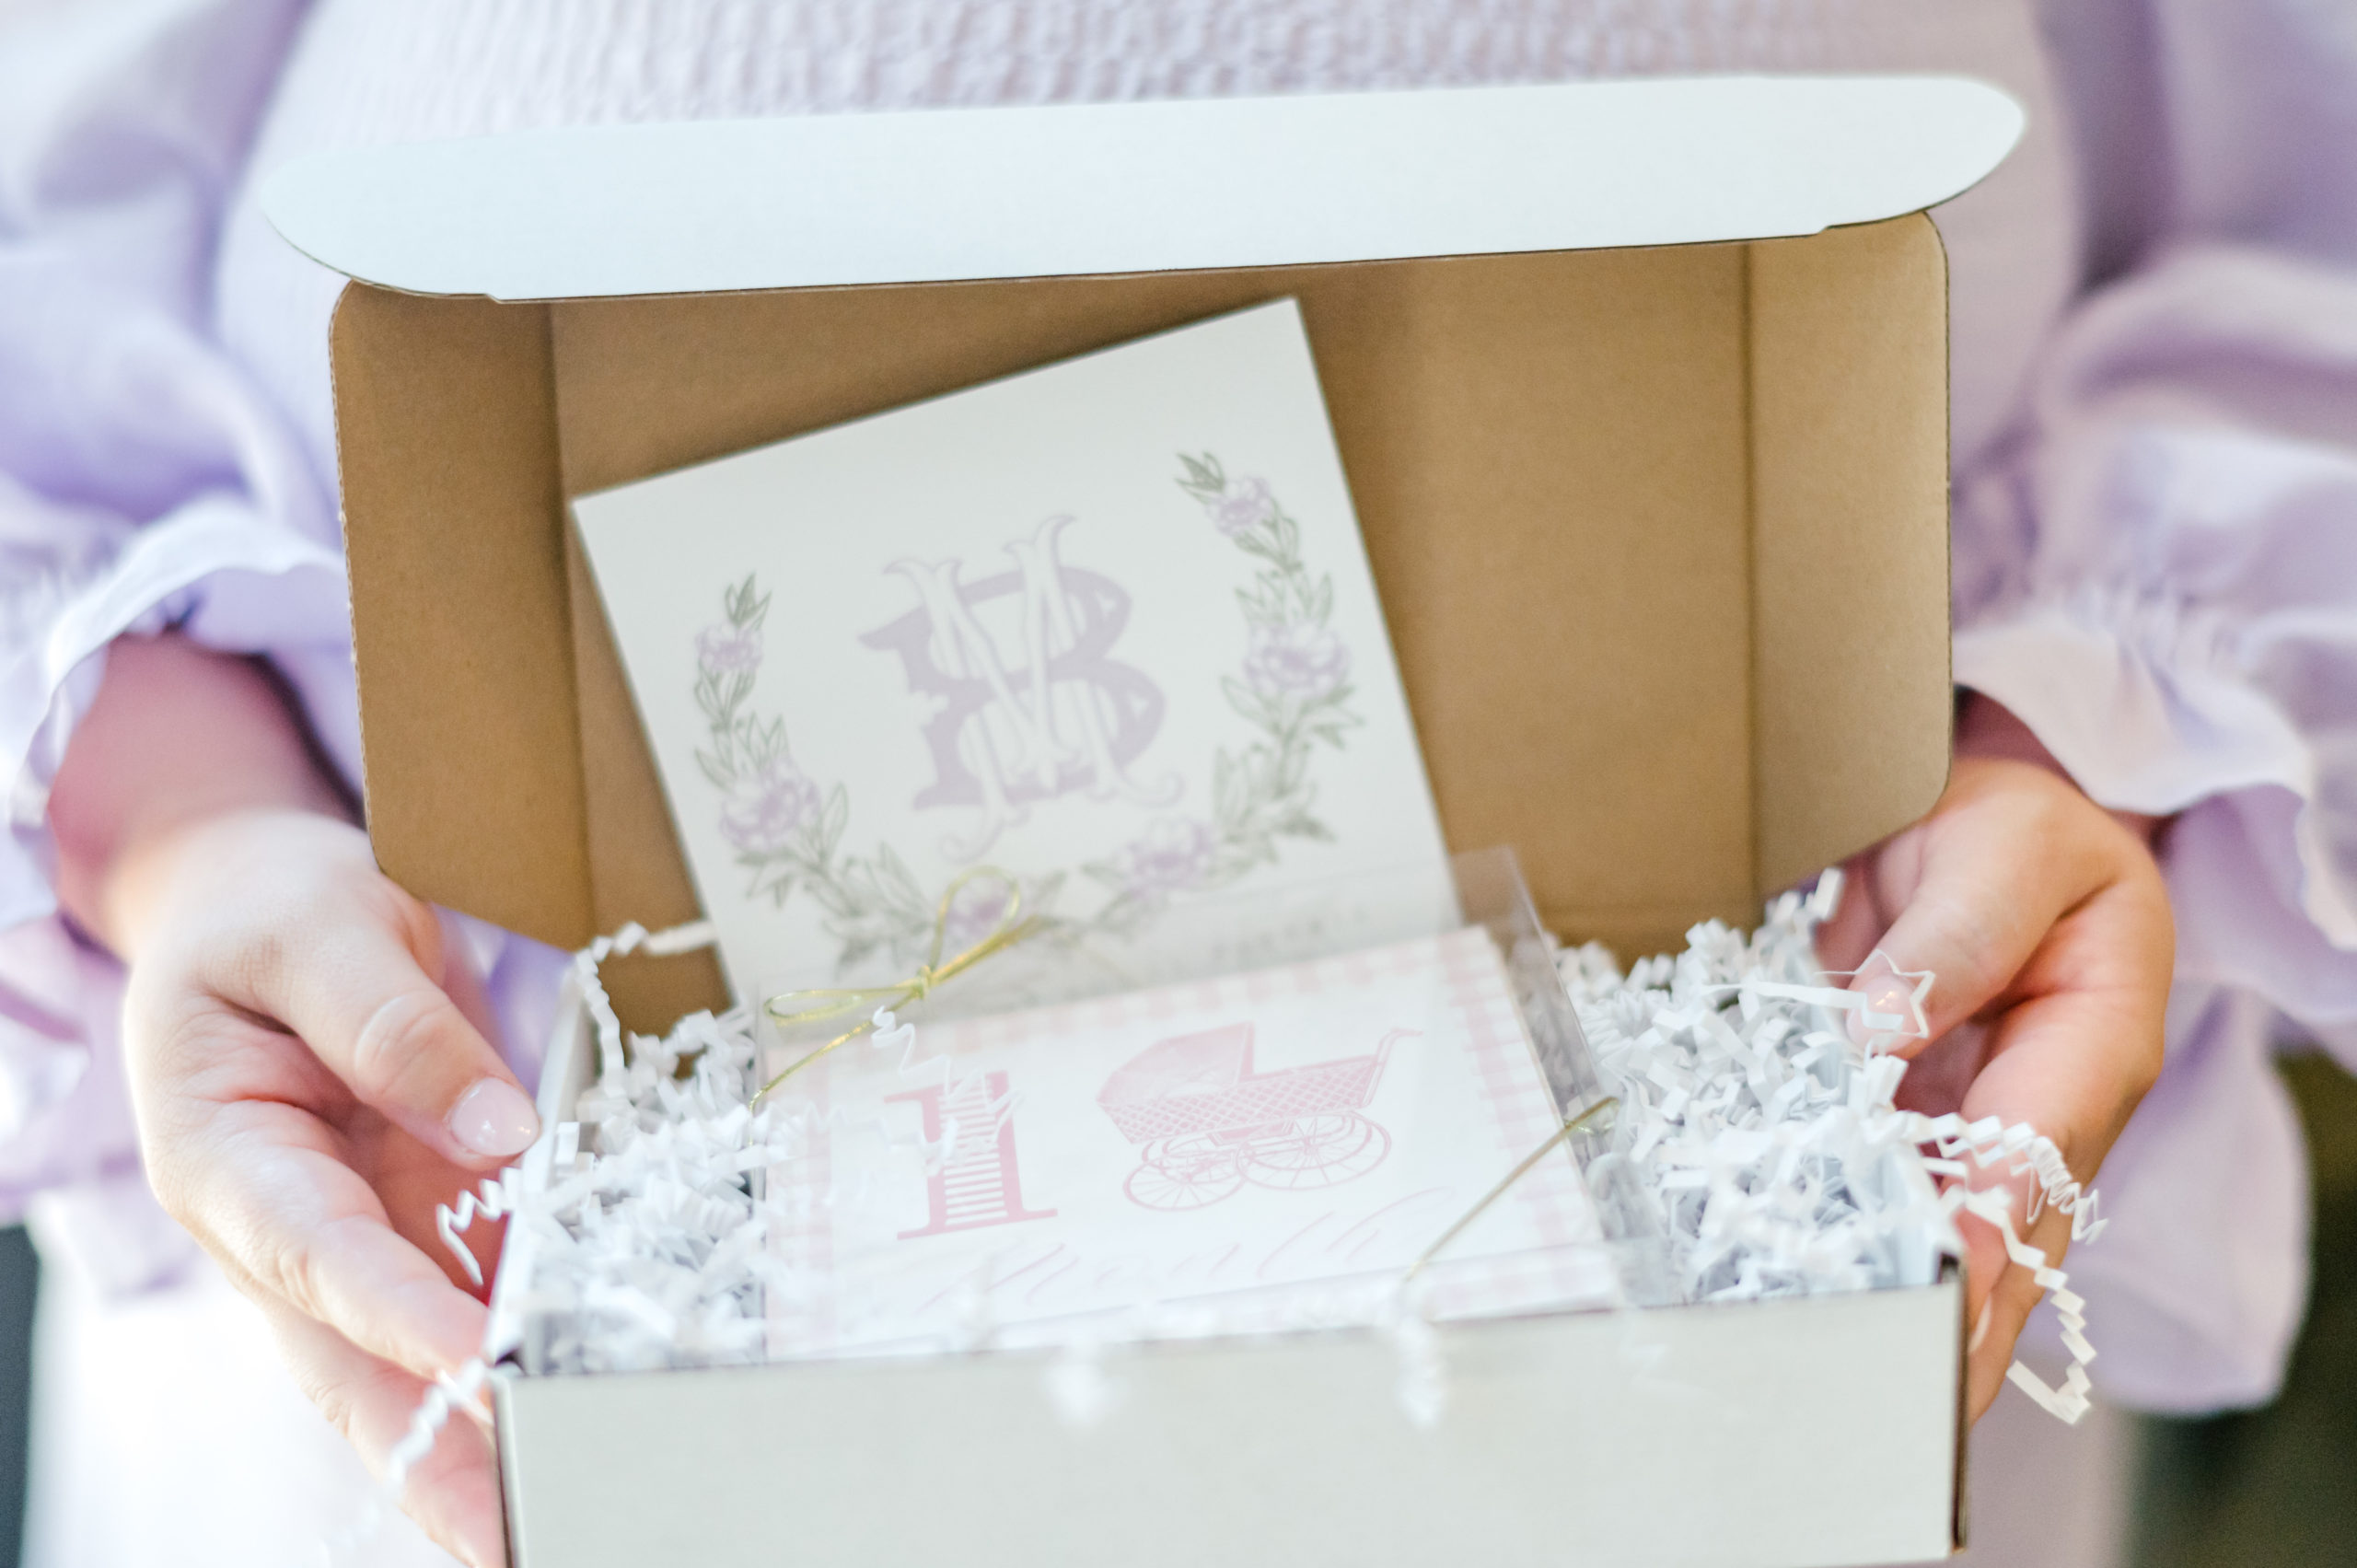 Woman holding a gift box full of milestone cards and stationary